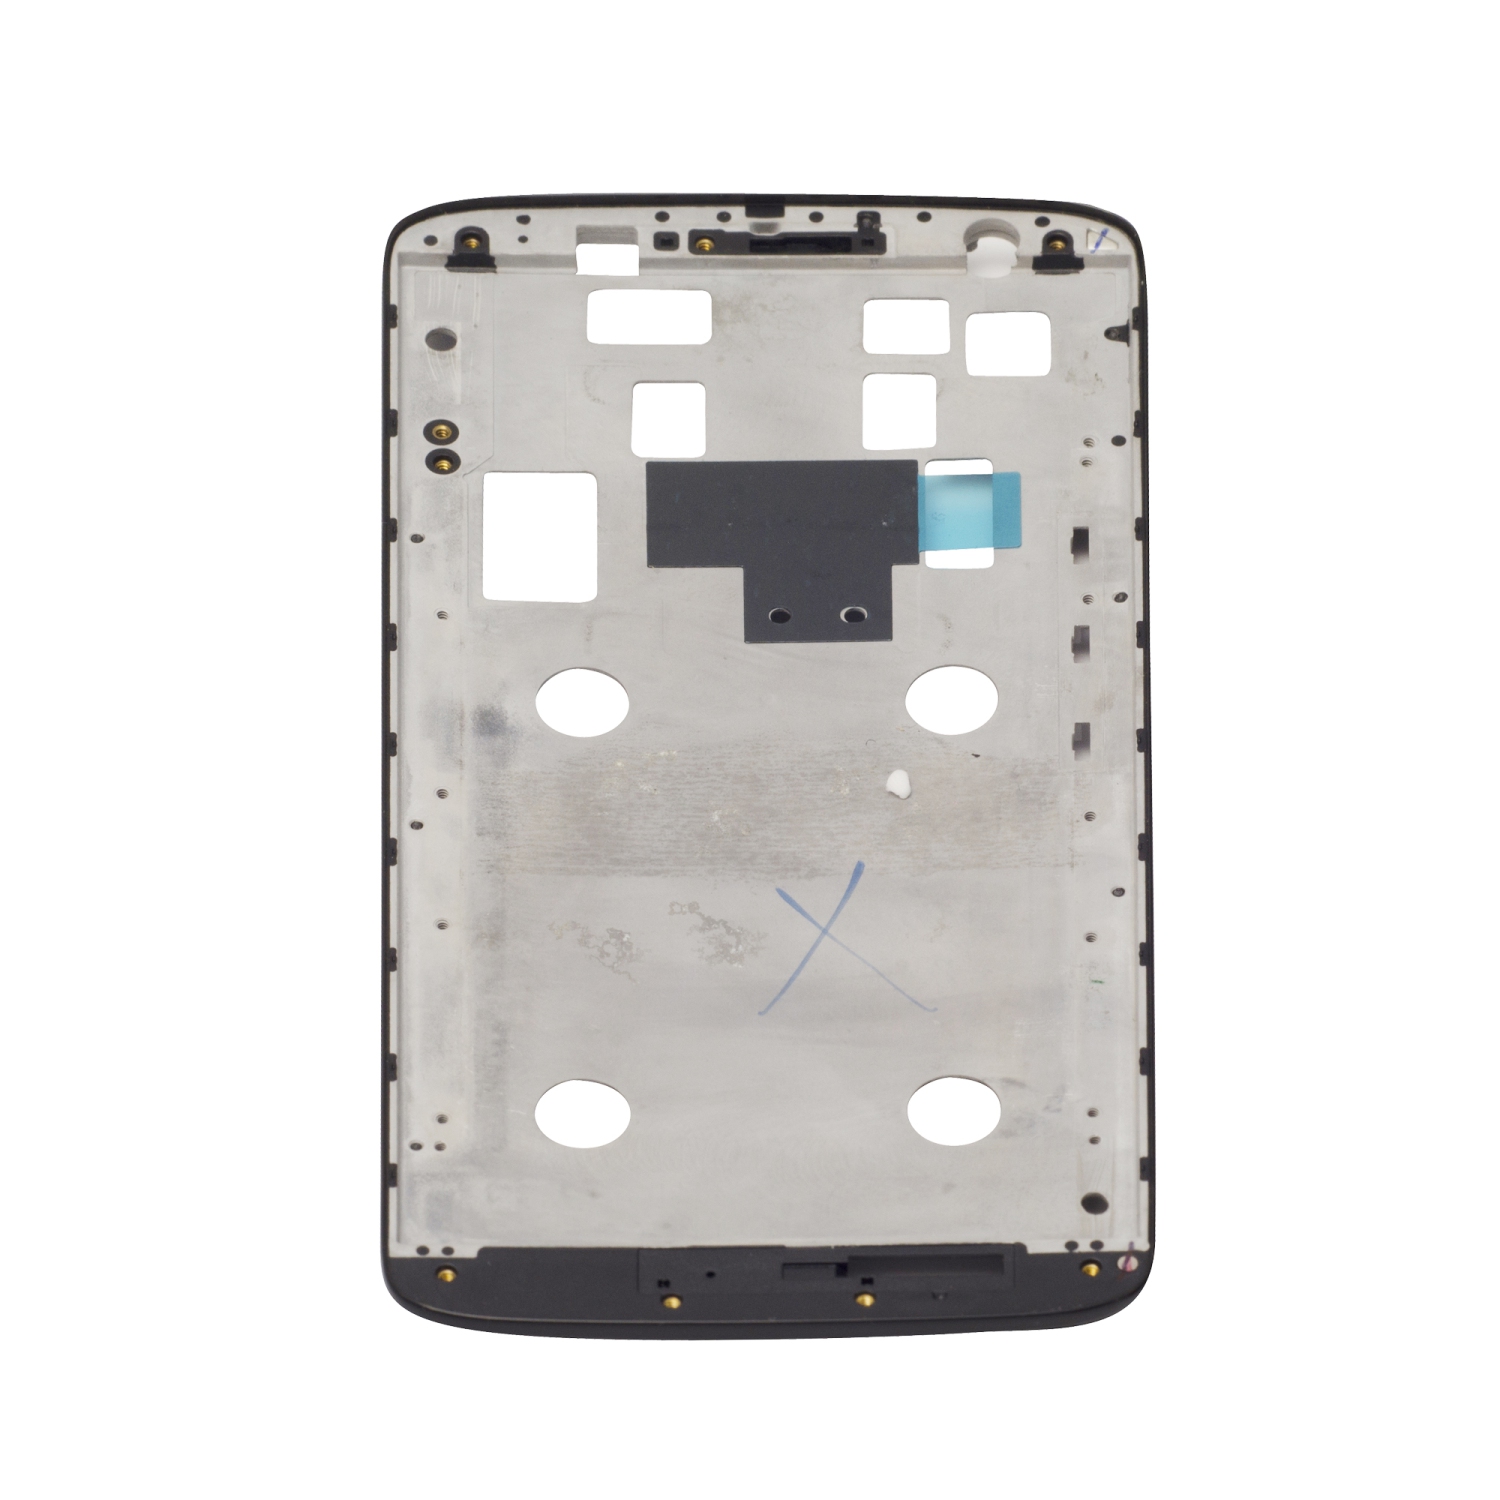 For Motorola Moto X Play XT1562 Mid Frame Replacement - Black